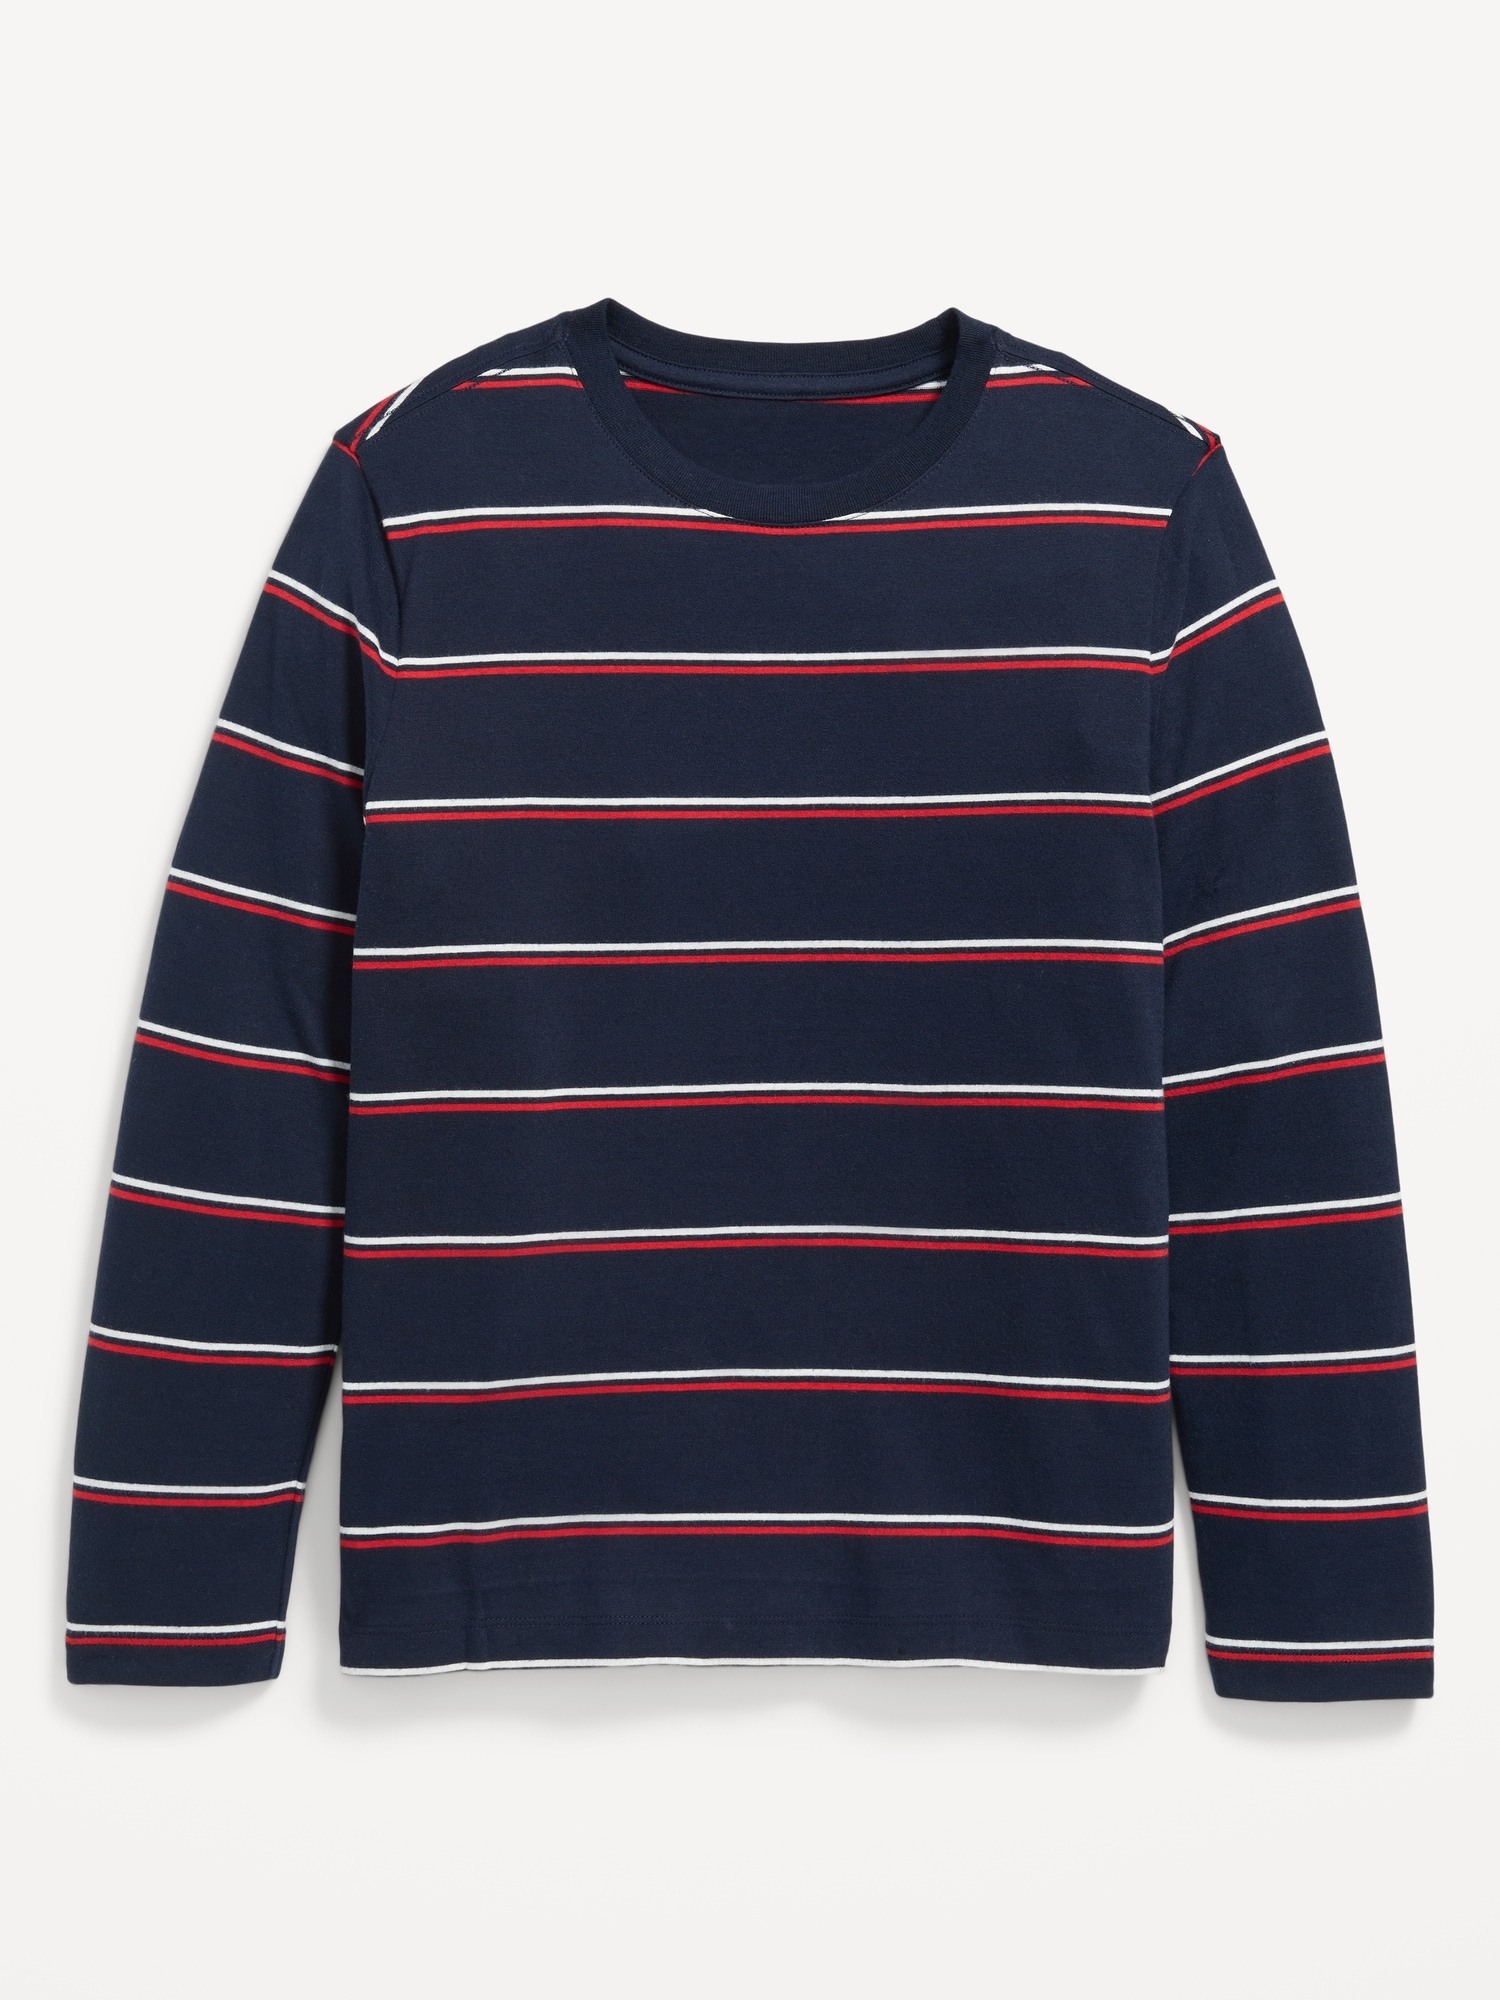 Printed Softest Long-Sleeve T-Shirt for Boys